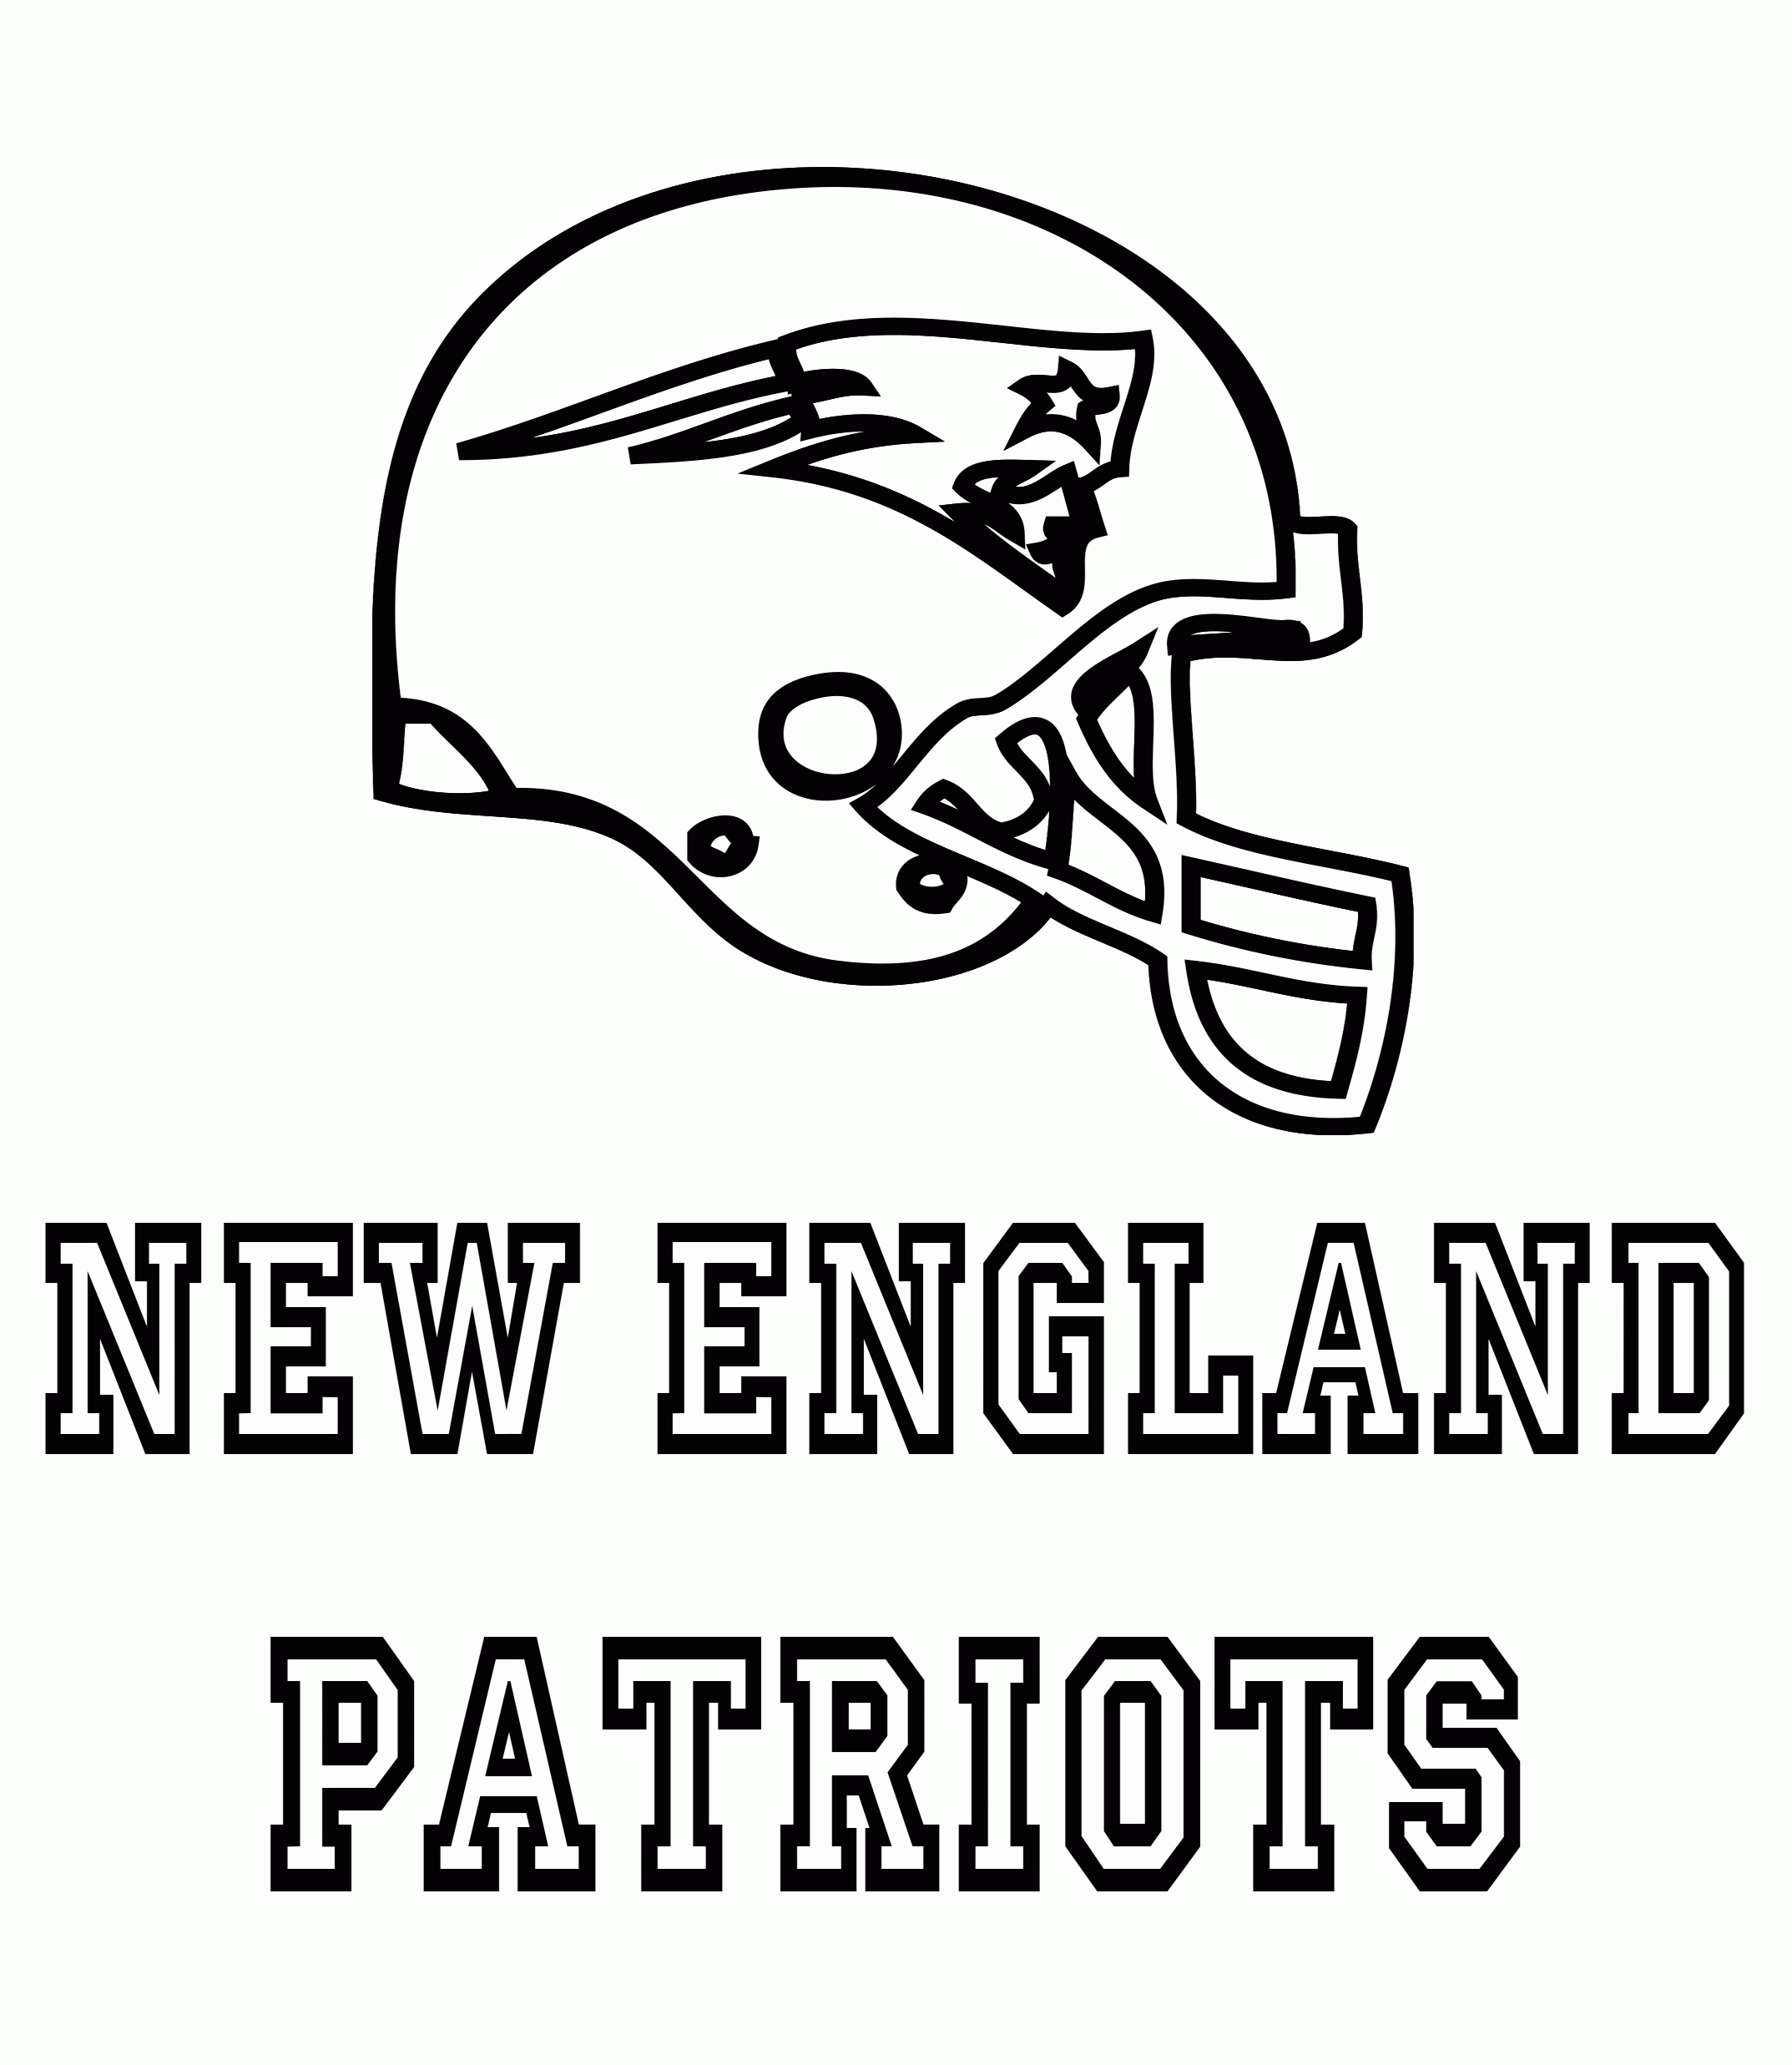 New England Patriots Coloring Pages - 123 Free Coloring Pages